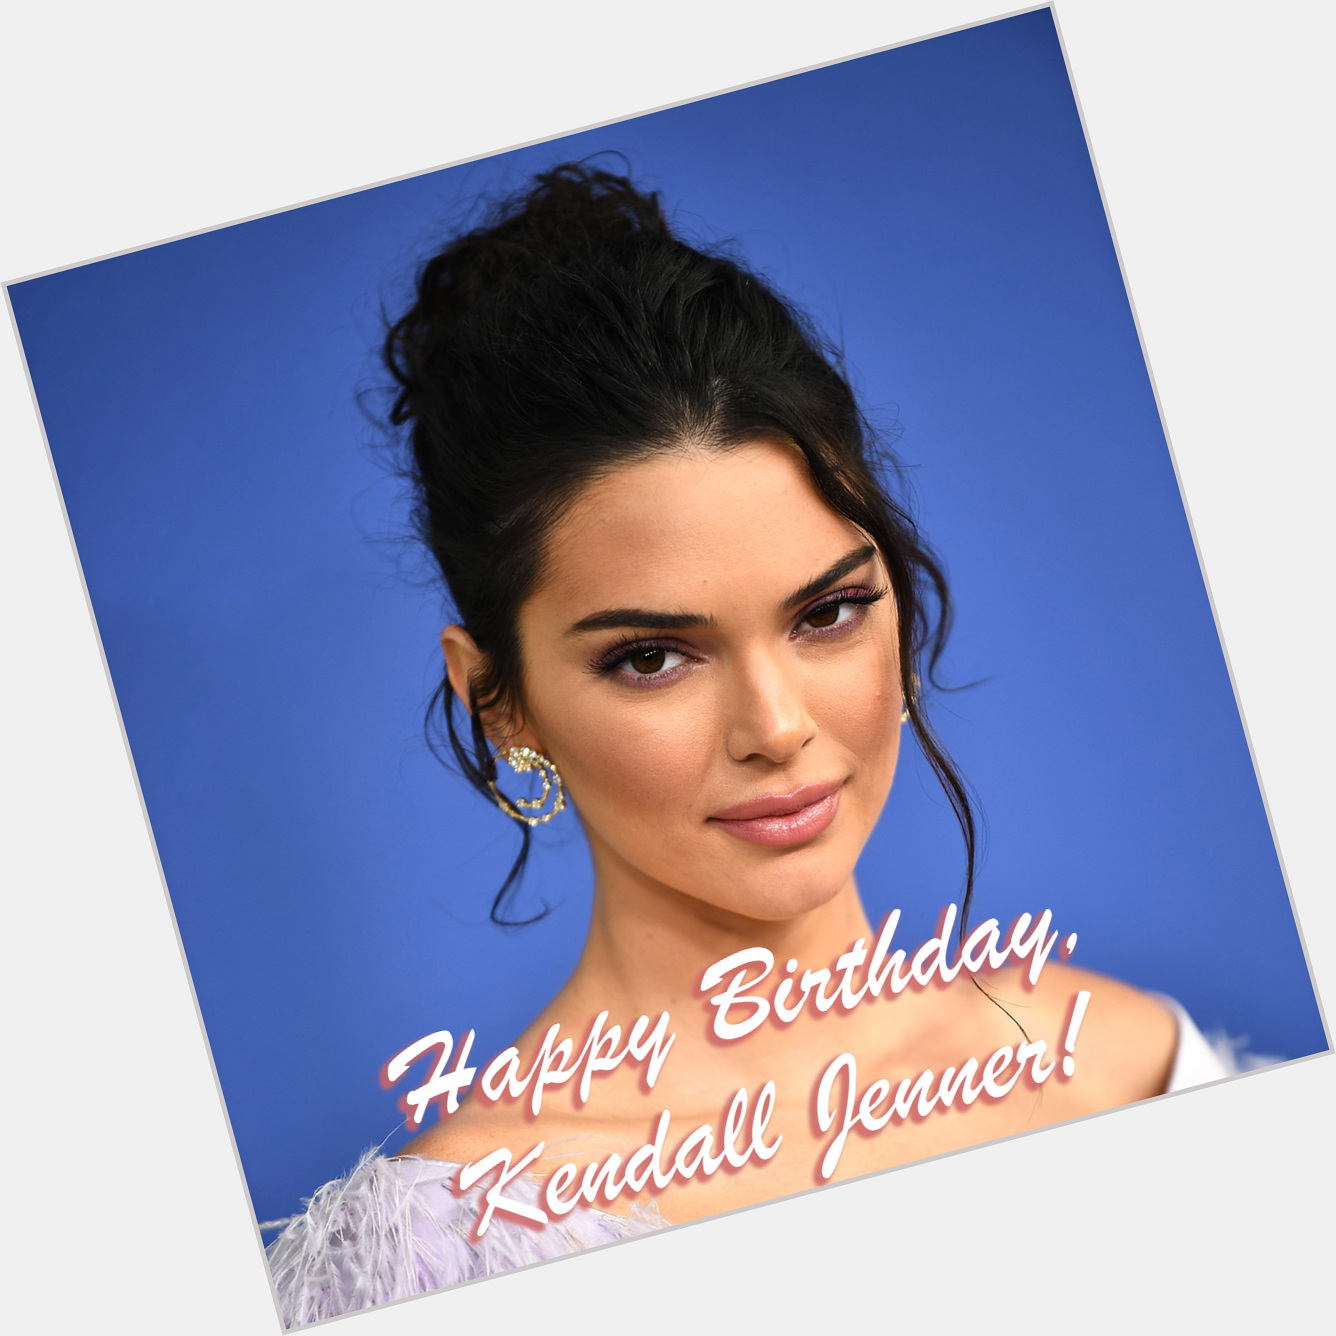 Happy Birthday, Kendall Jenner! She\s 25 years old today! 